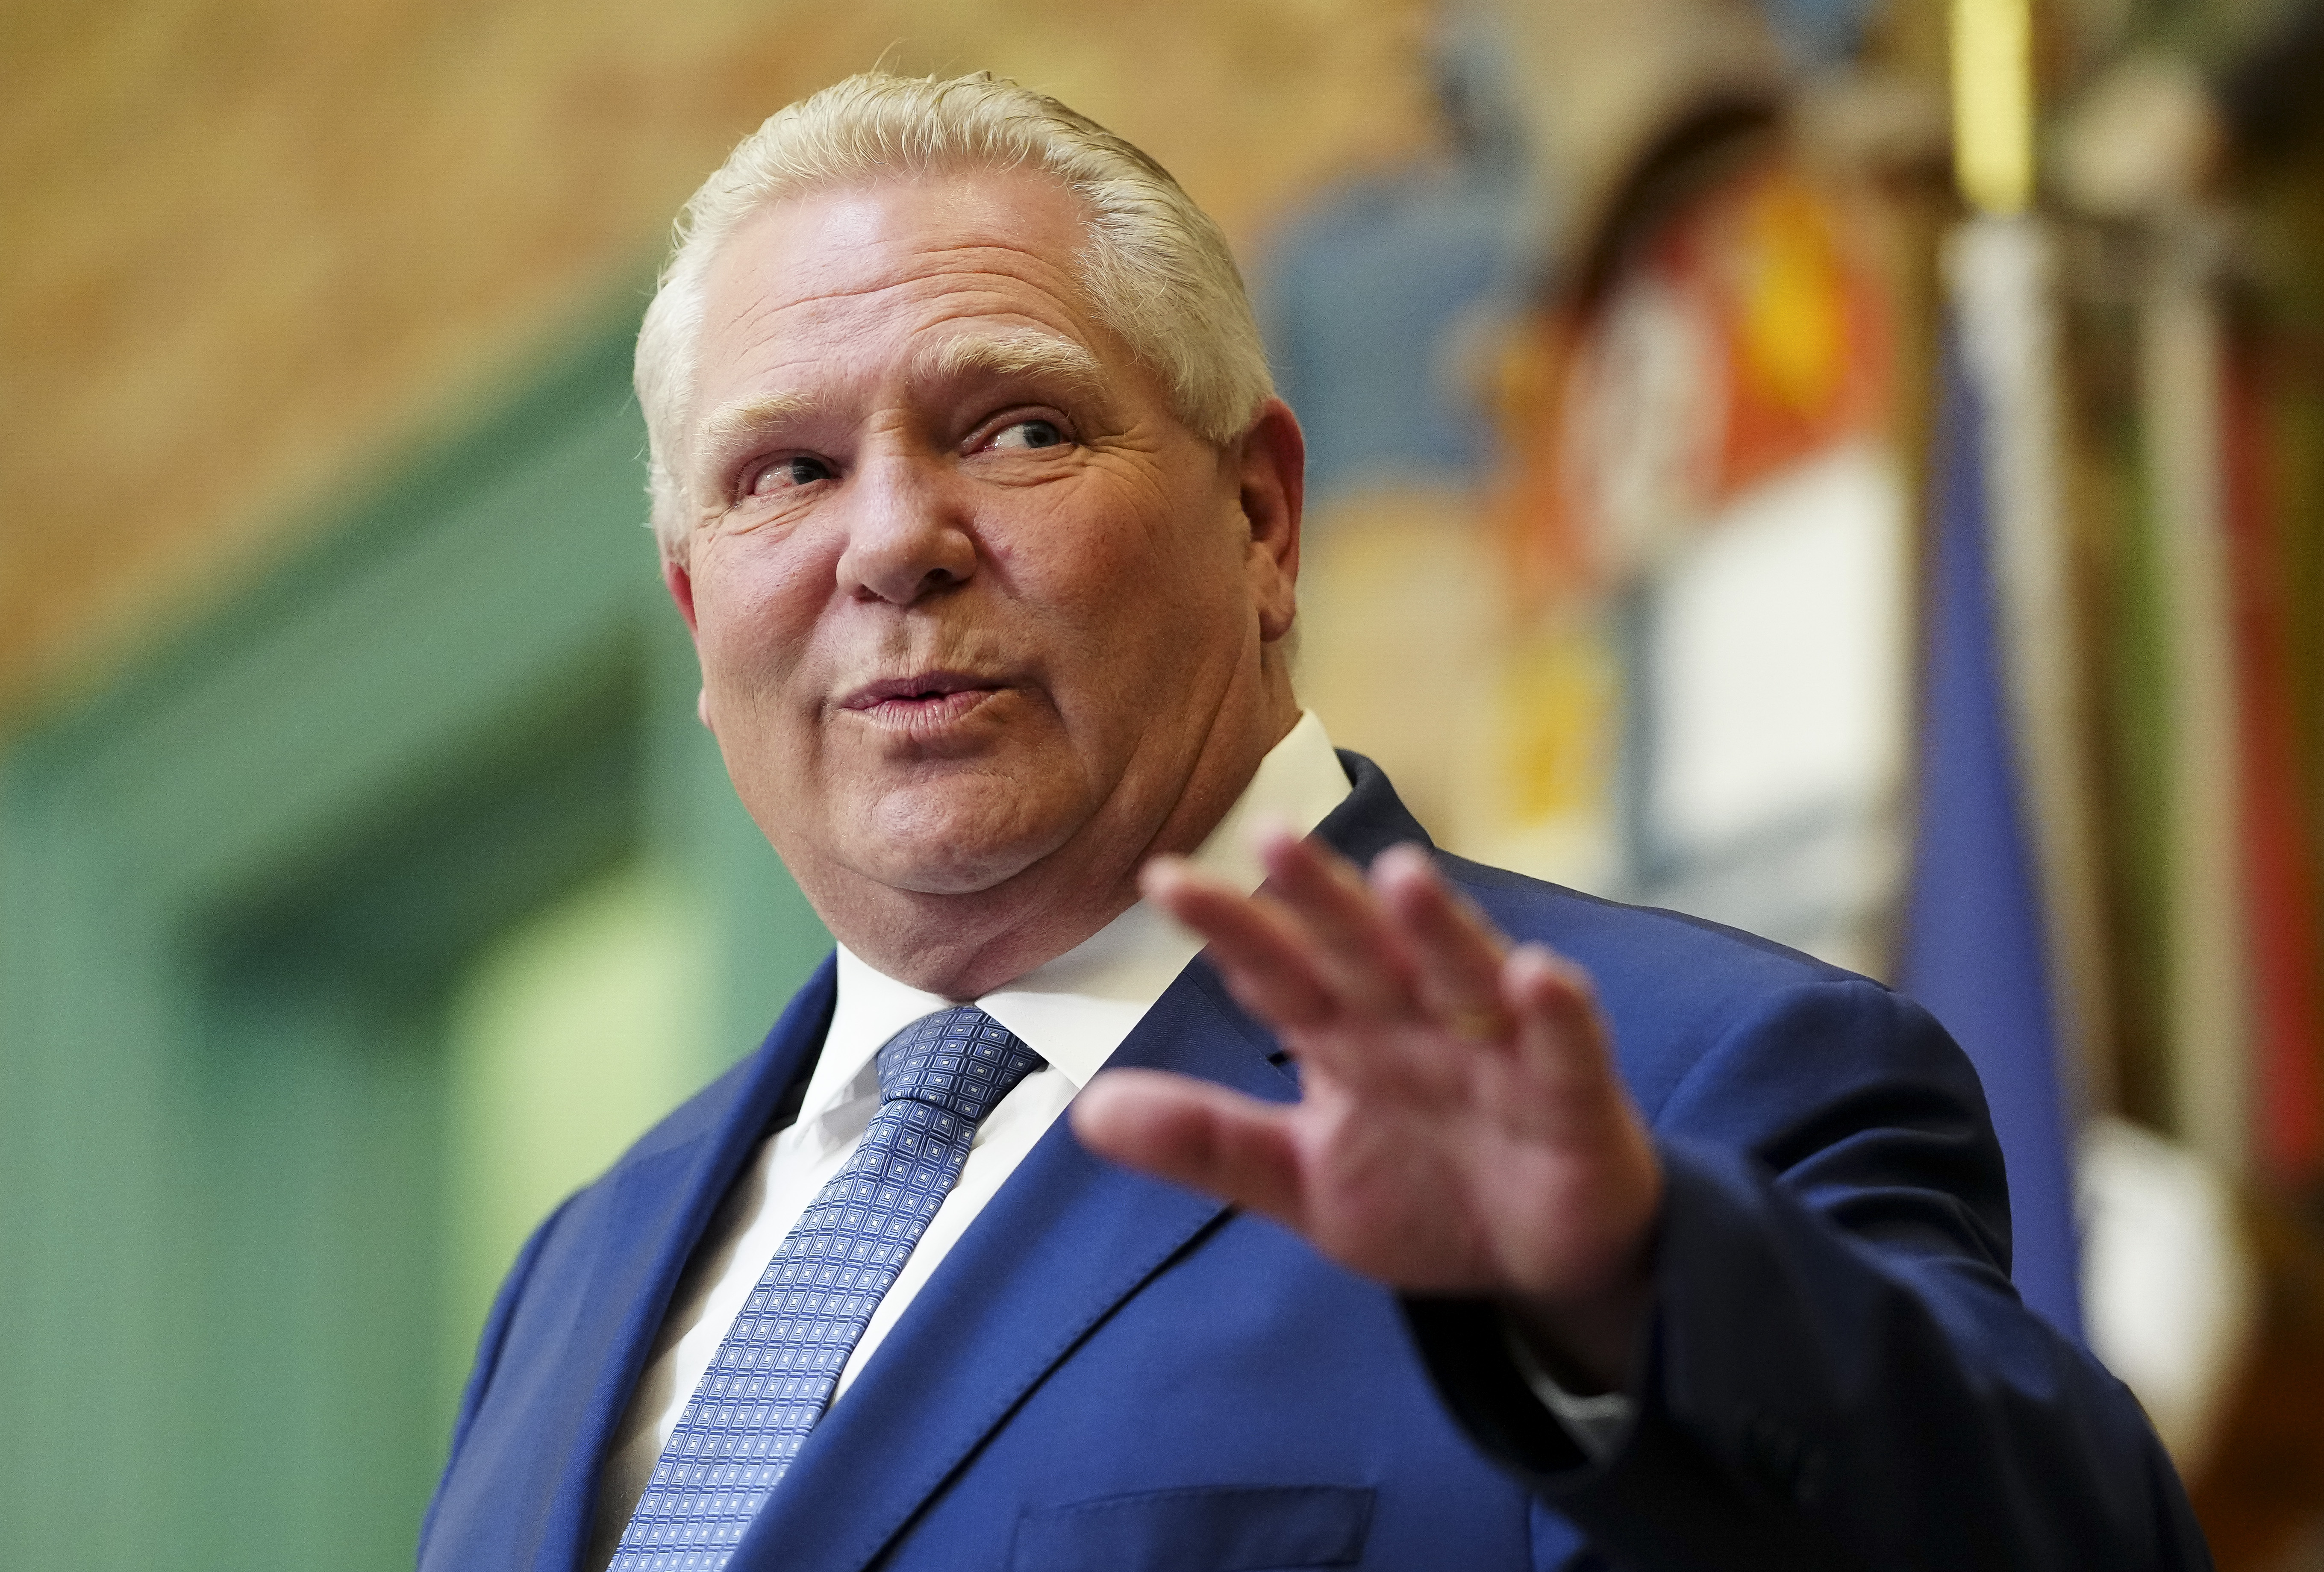 Ontario Premier Doug Ford weighs in on campus encampment protests